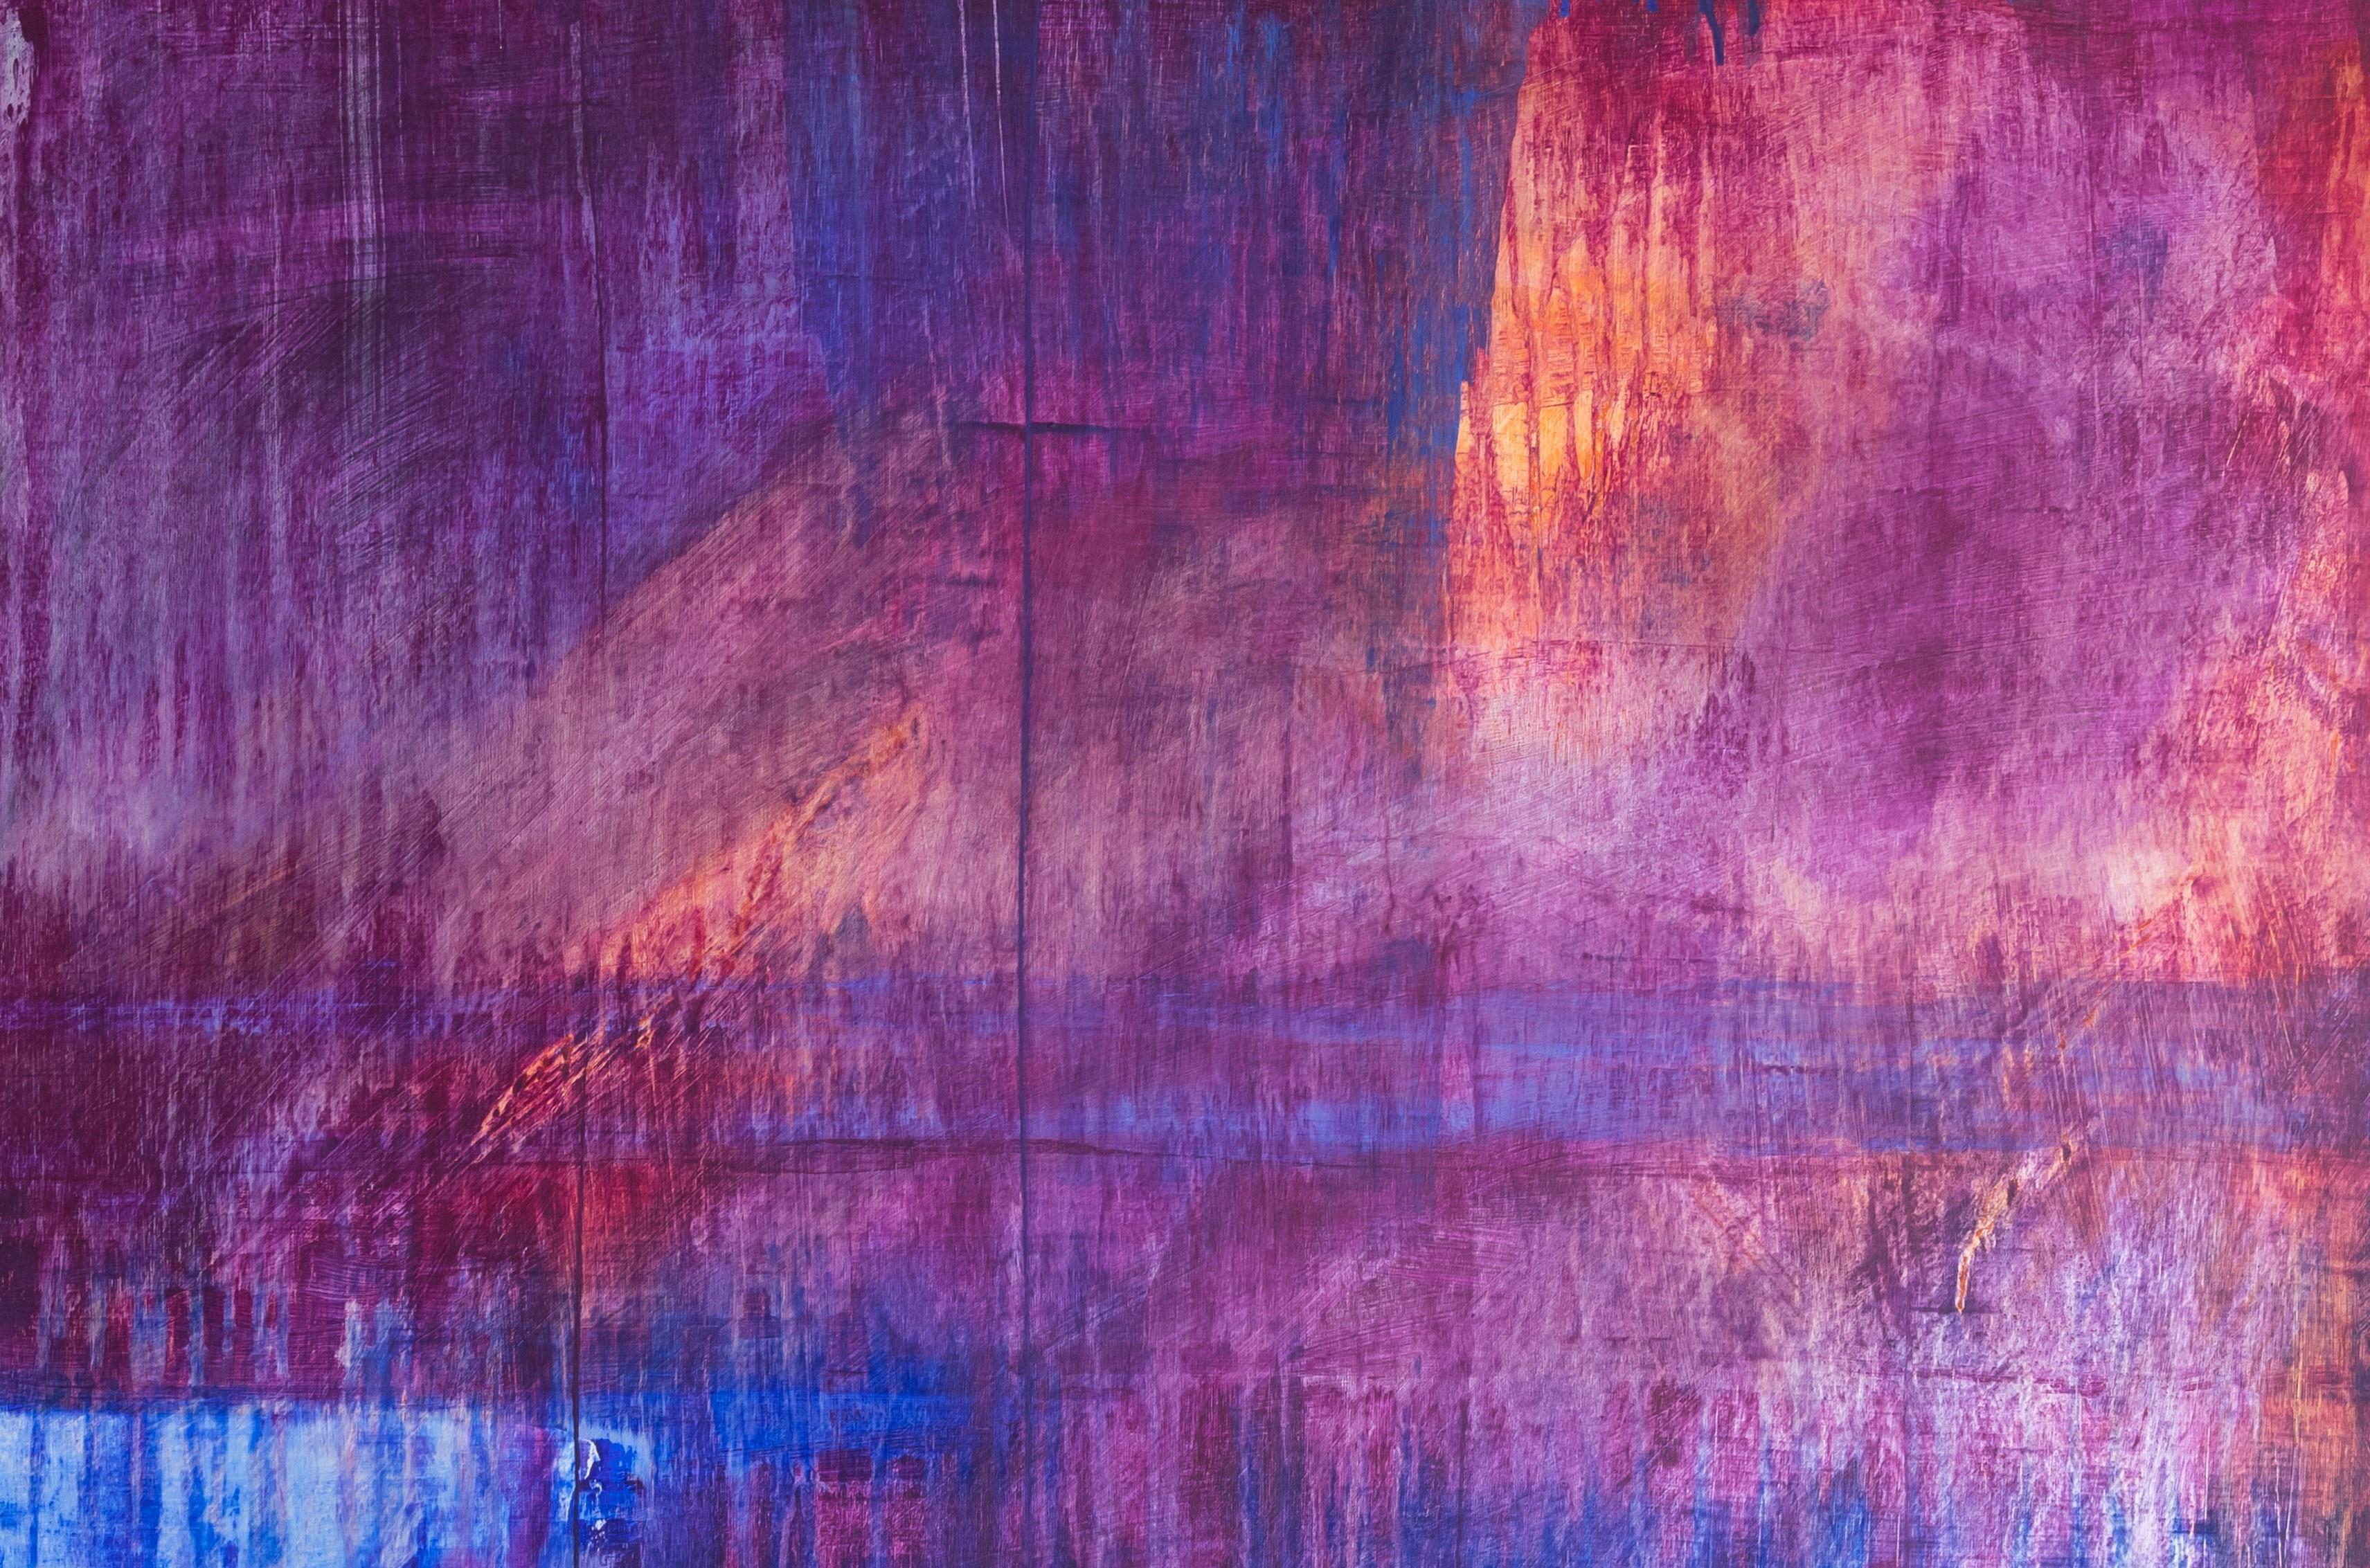 Twilight, Acrylic, Abstract, Blue, Pink, Landscape, painting, colorful - Painting by Stephanie Cate